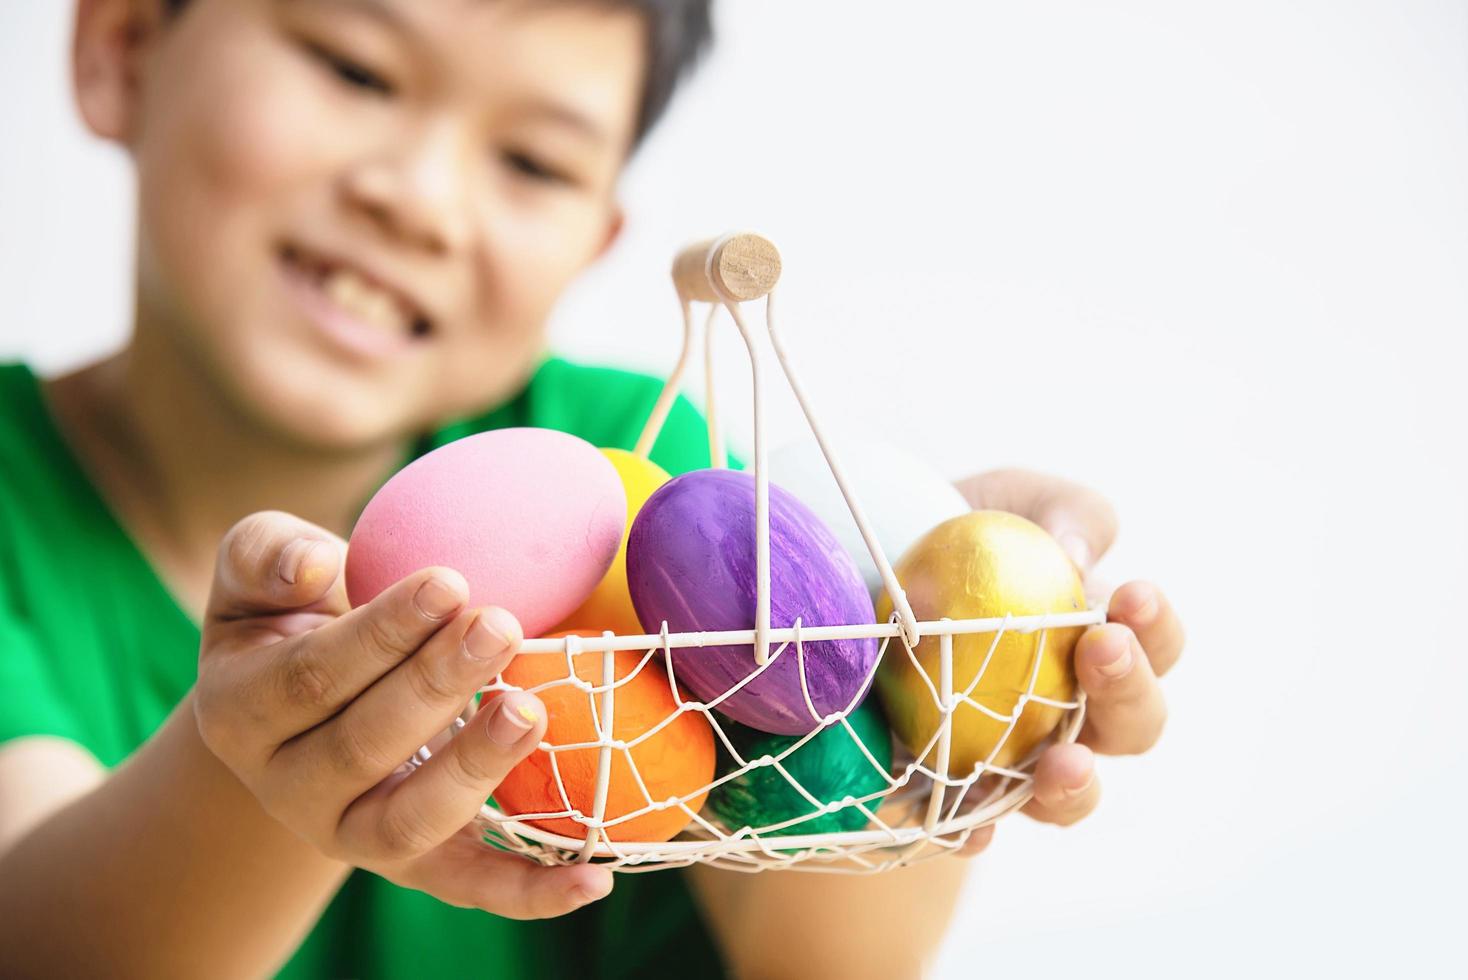 Child showing colorful Easter eggs happily - Easter holiday celebration concept photo